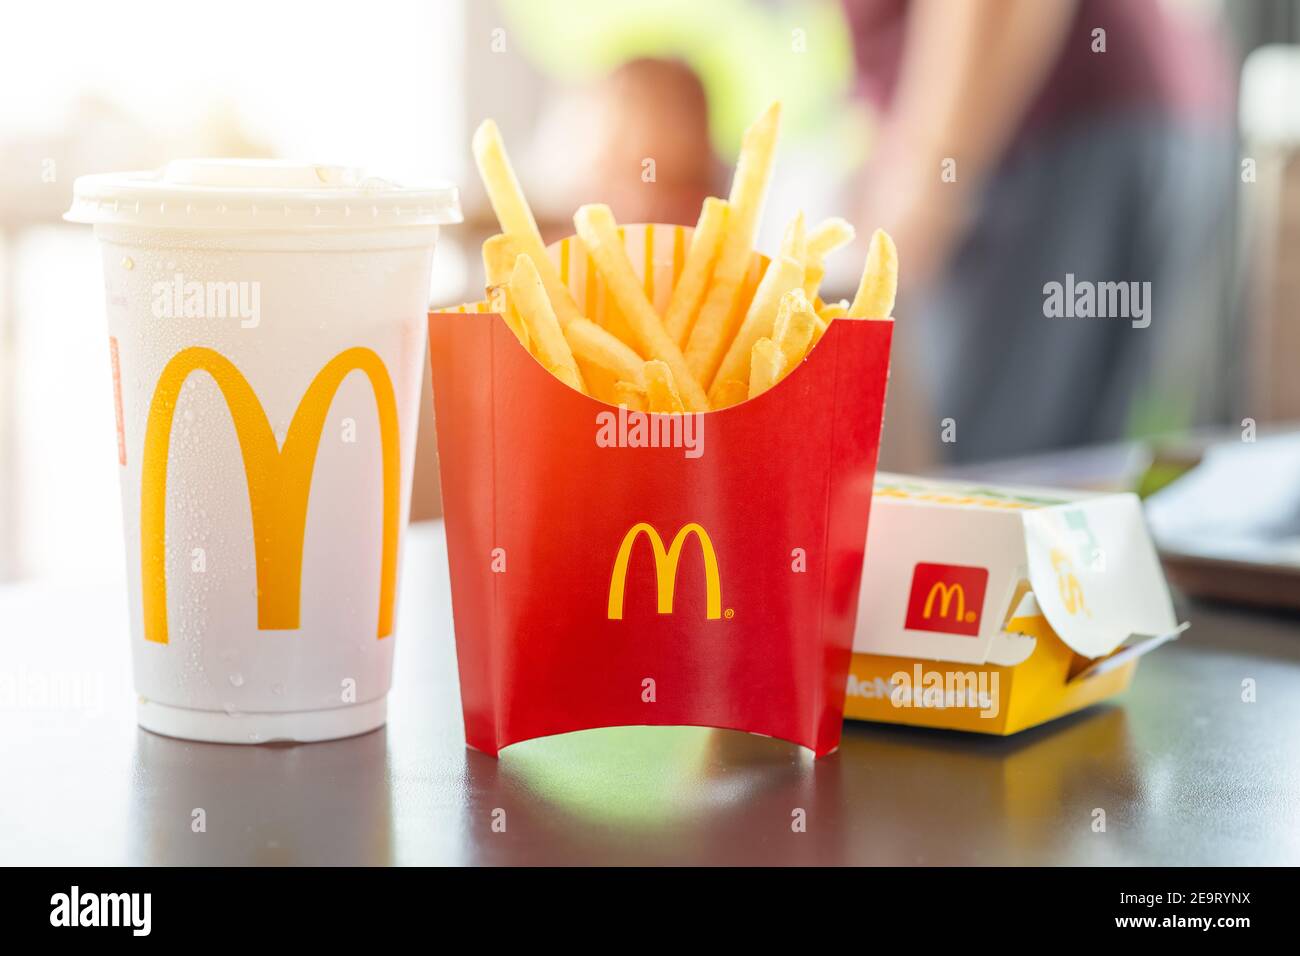 McDonald's French fries fastfood set, Most popular American style meal, McDonald's operates morethan 30,000 restaurants worldwide.30 December 2020, Ba Stock Photo